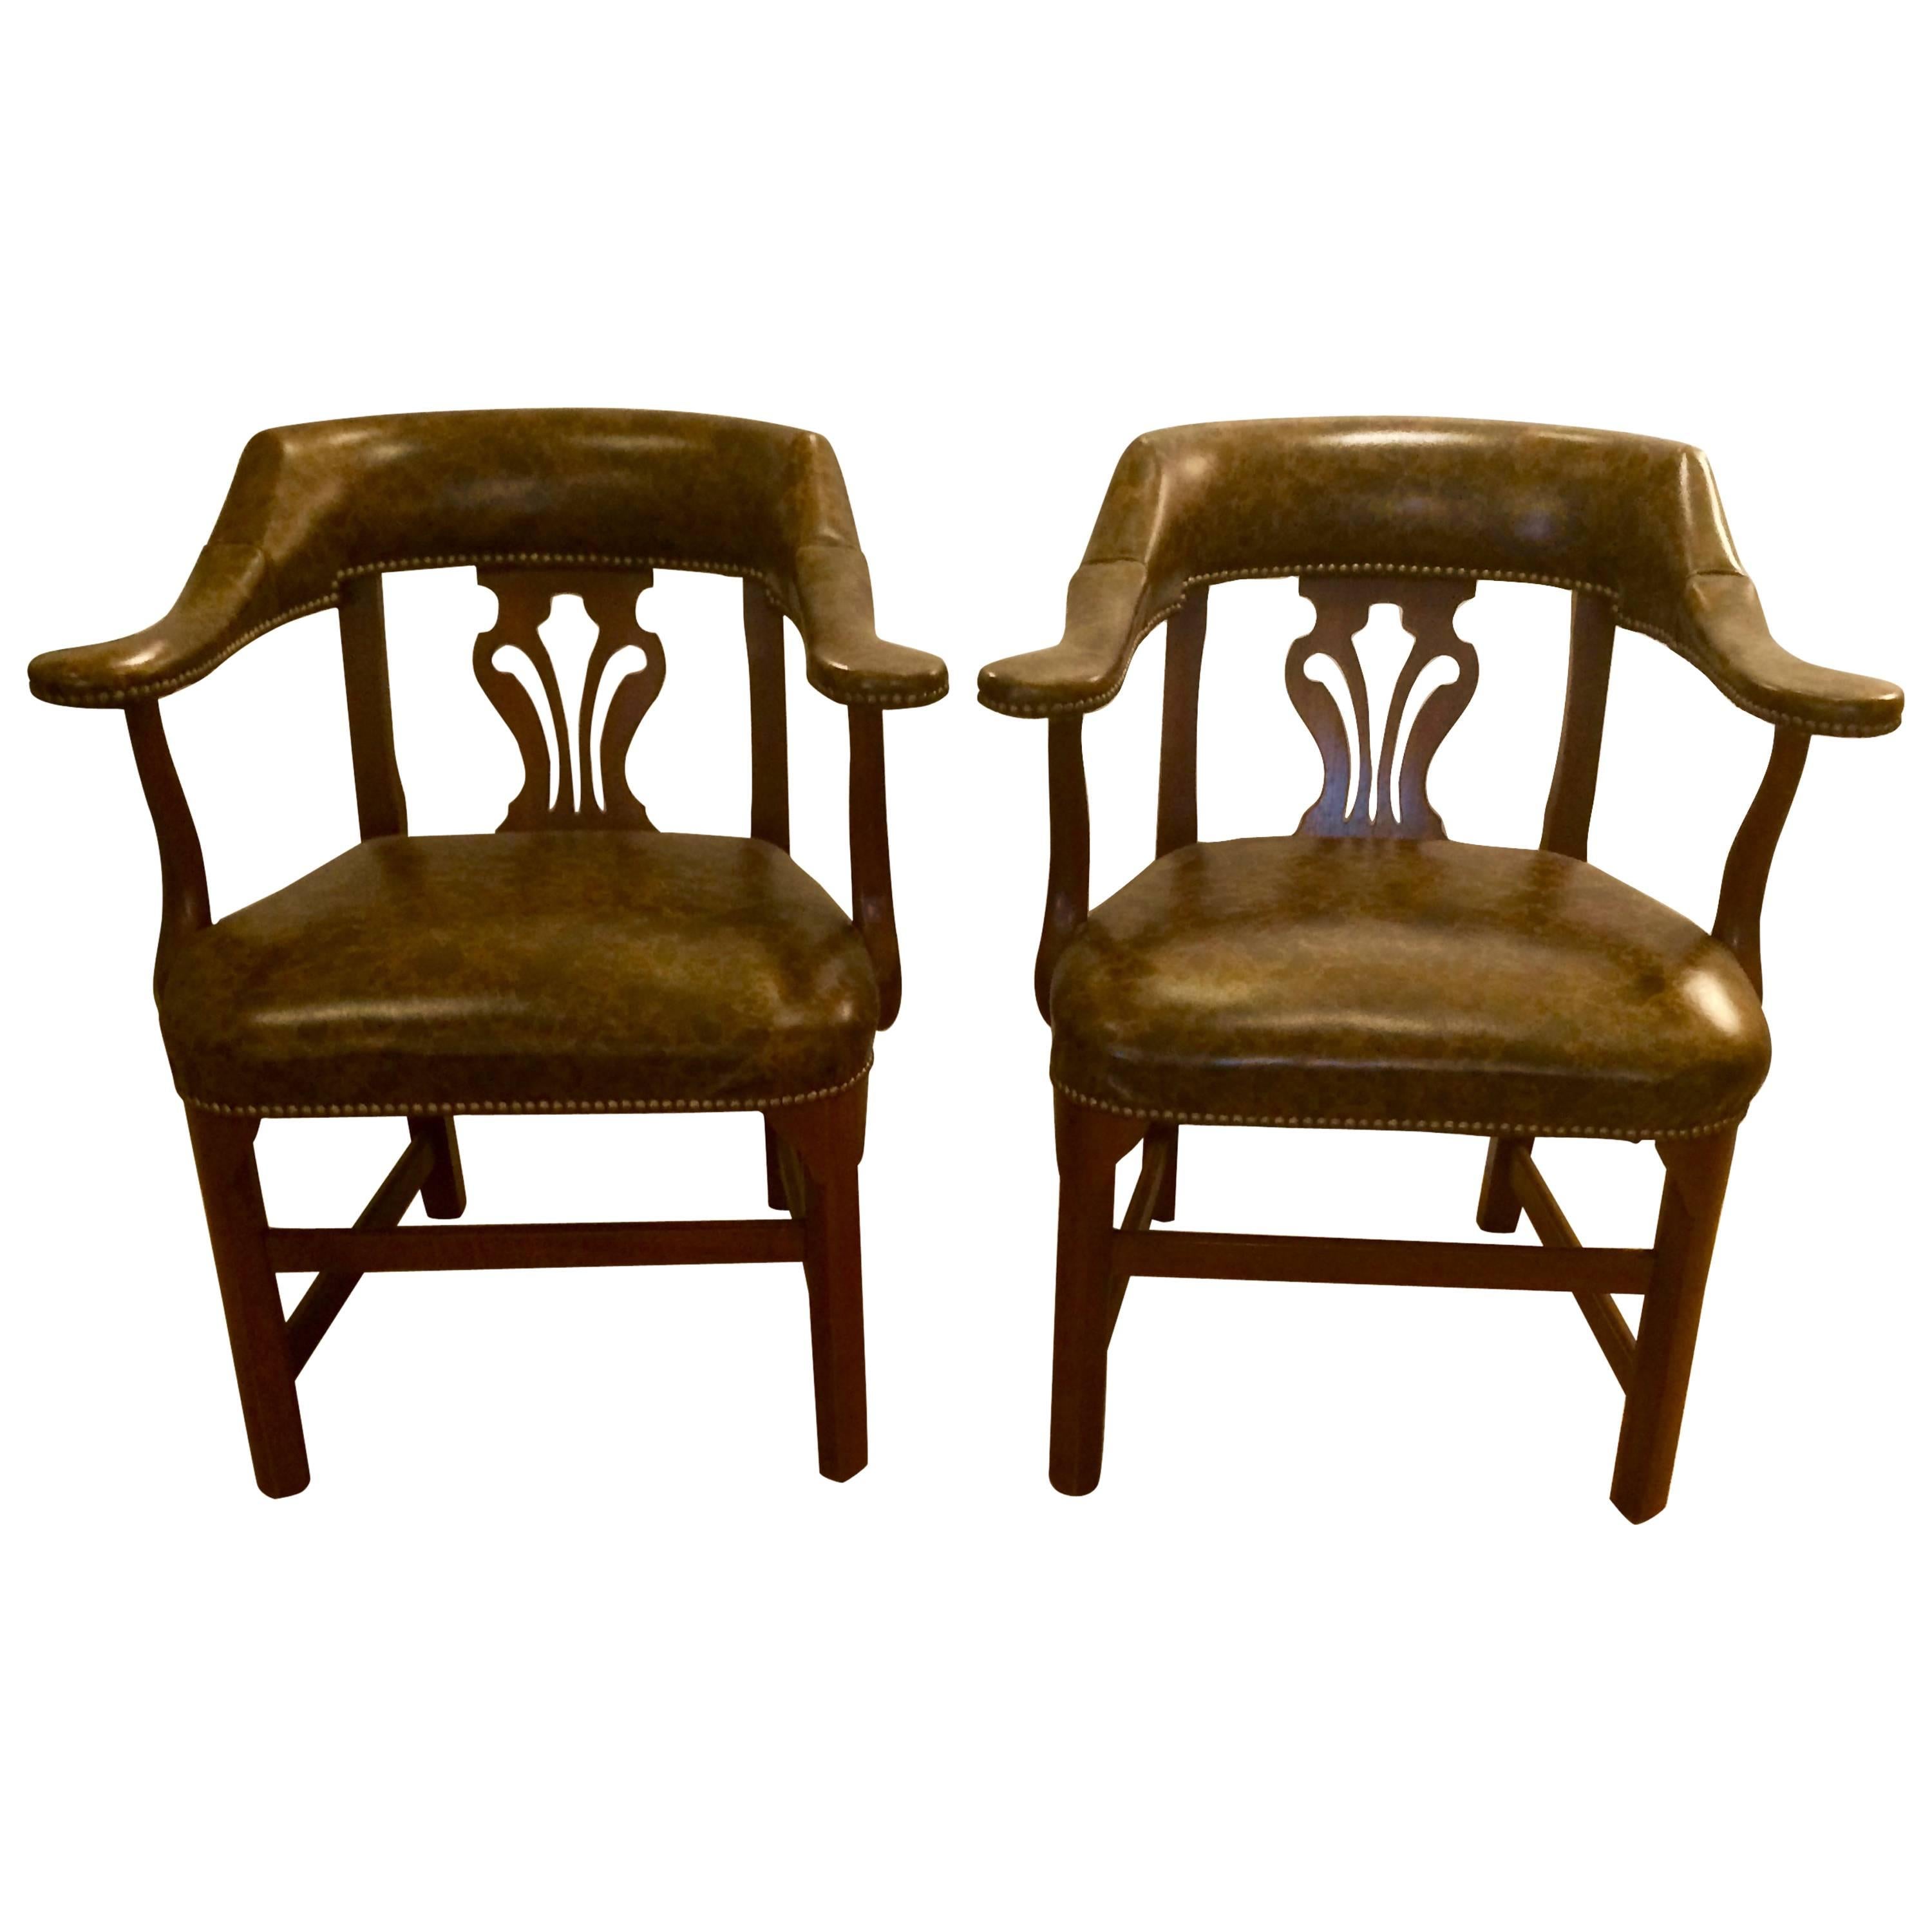 Pair of Faux Tortoise Leather Club Chairs